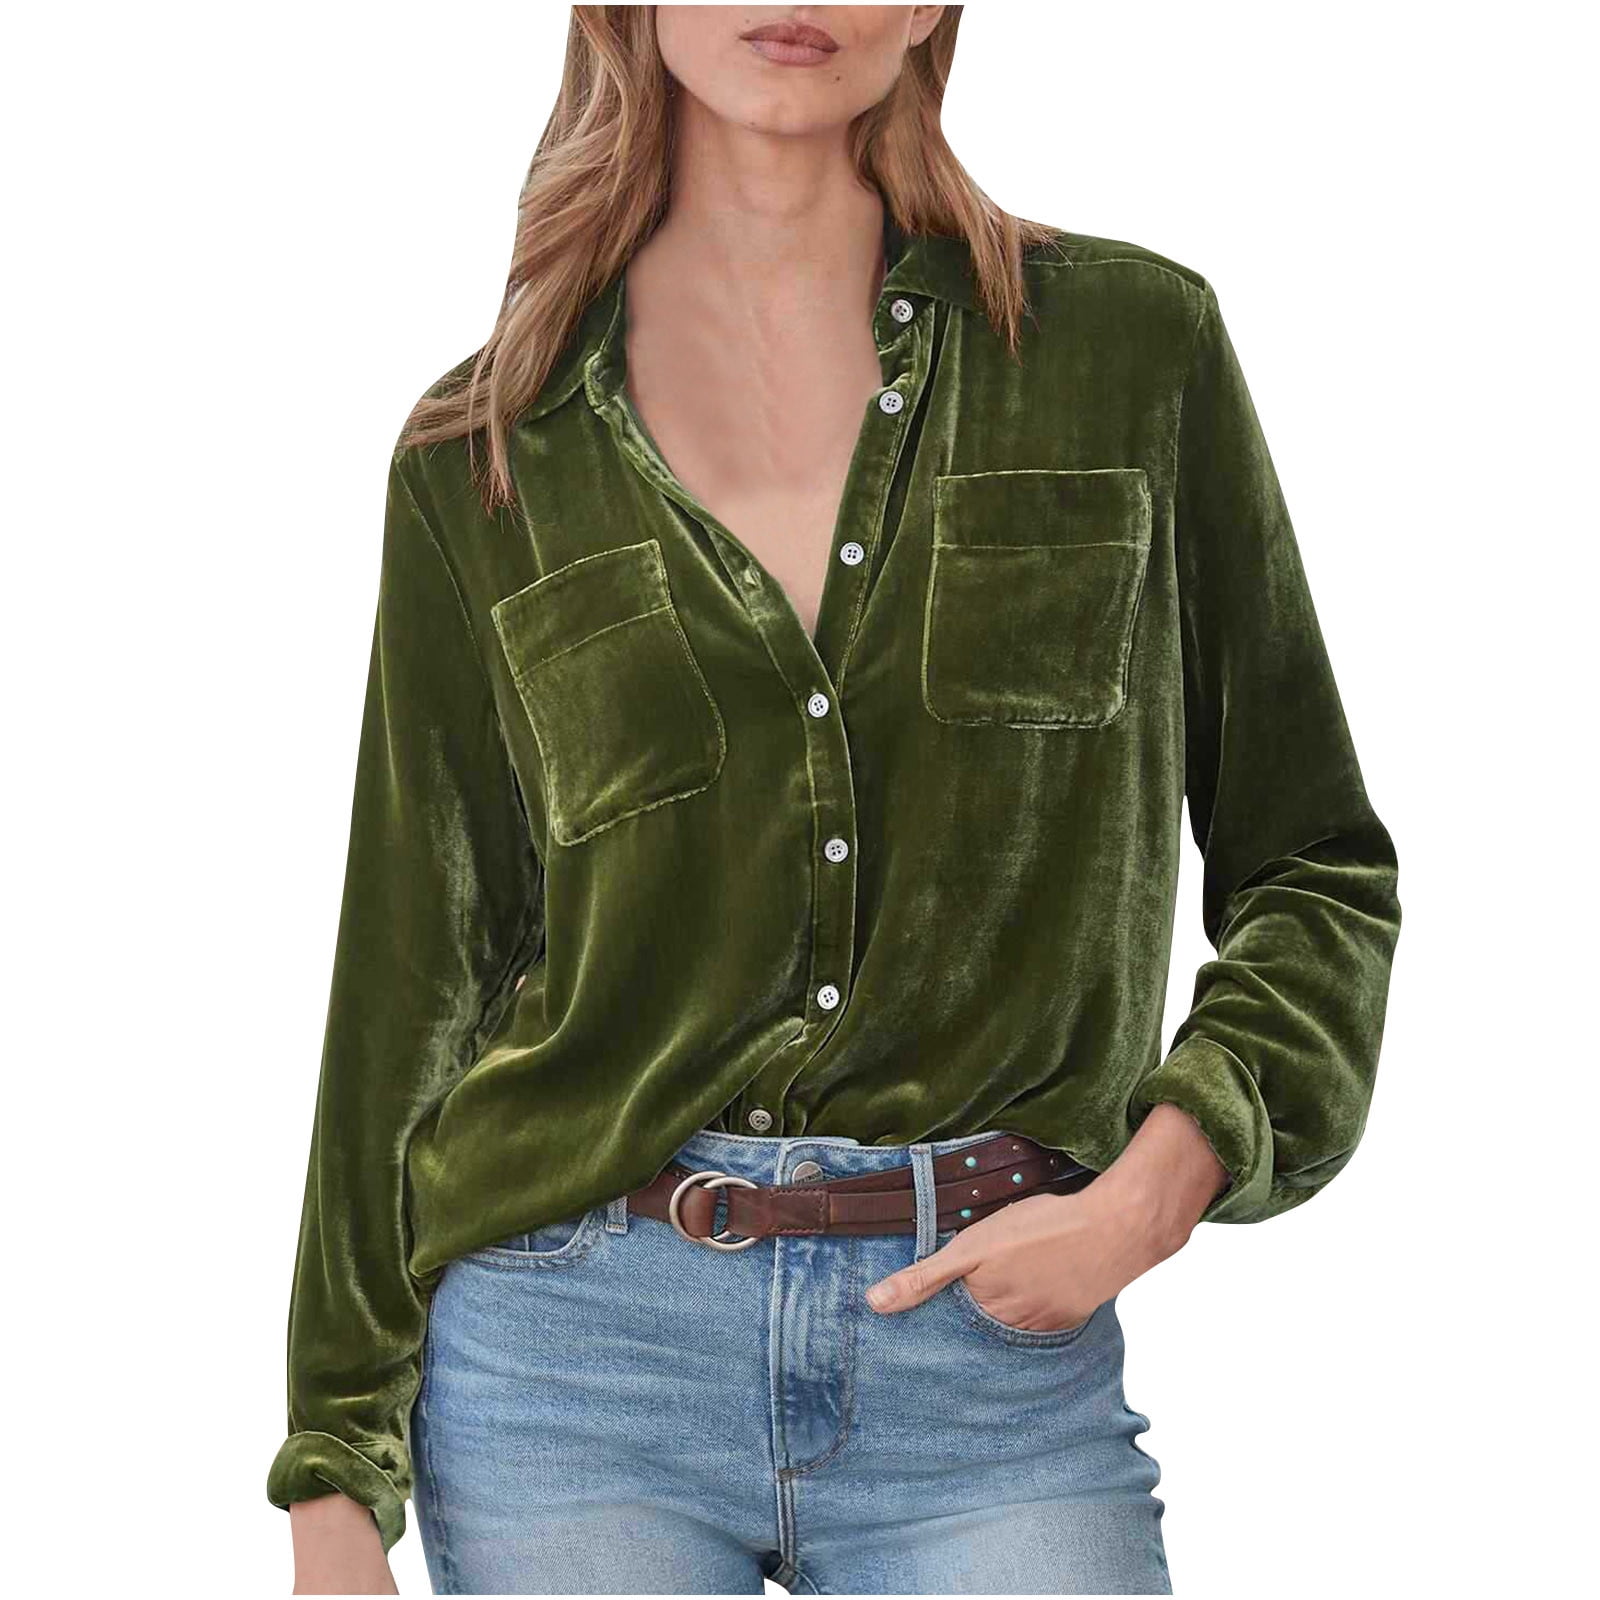 Vintage Khaki Velvet Velvet Corset Top Shirt With Long Sleeves And Ruched  Off Shoulder Design Perfect For Spring And Sexy Occasions From Glenan,  $18.59